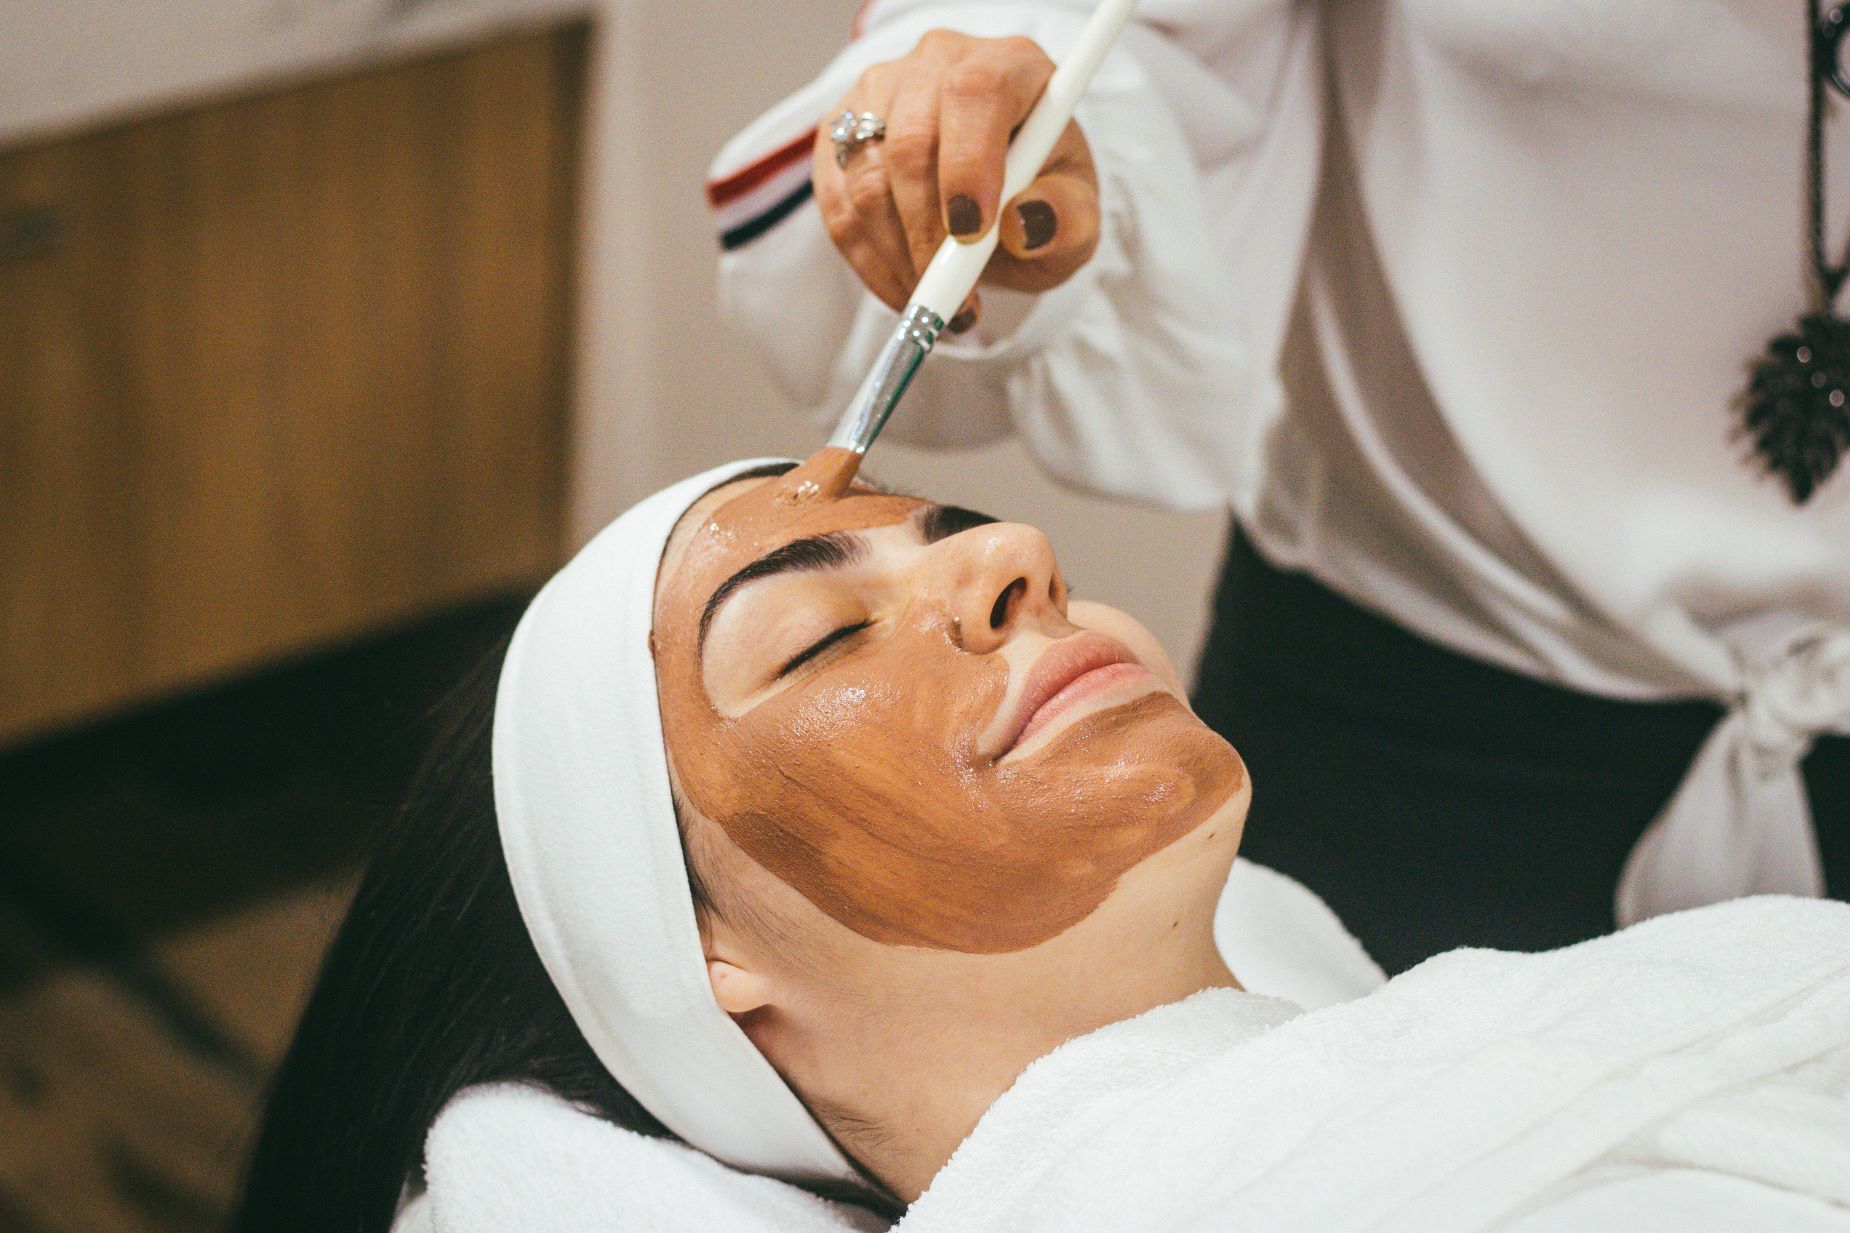 An image of a woman getting a facial.